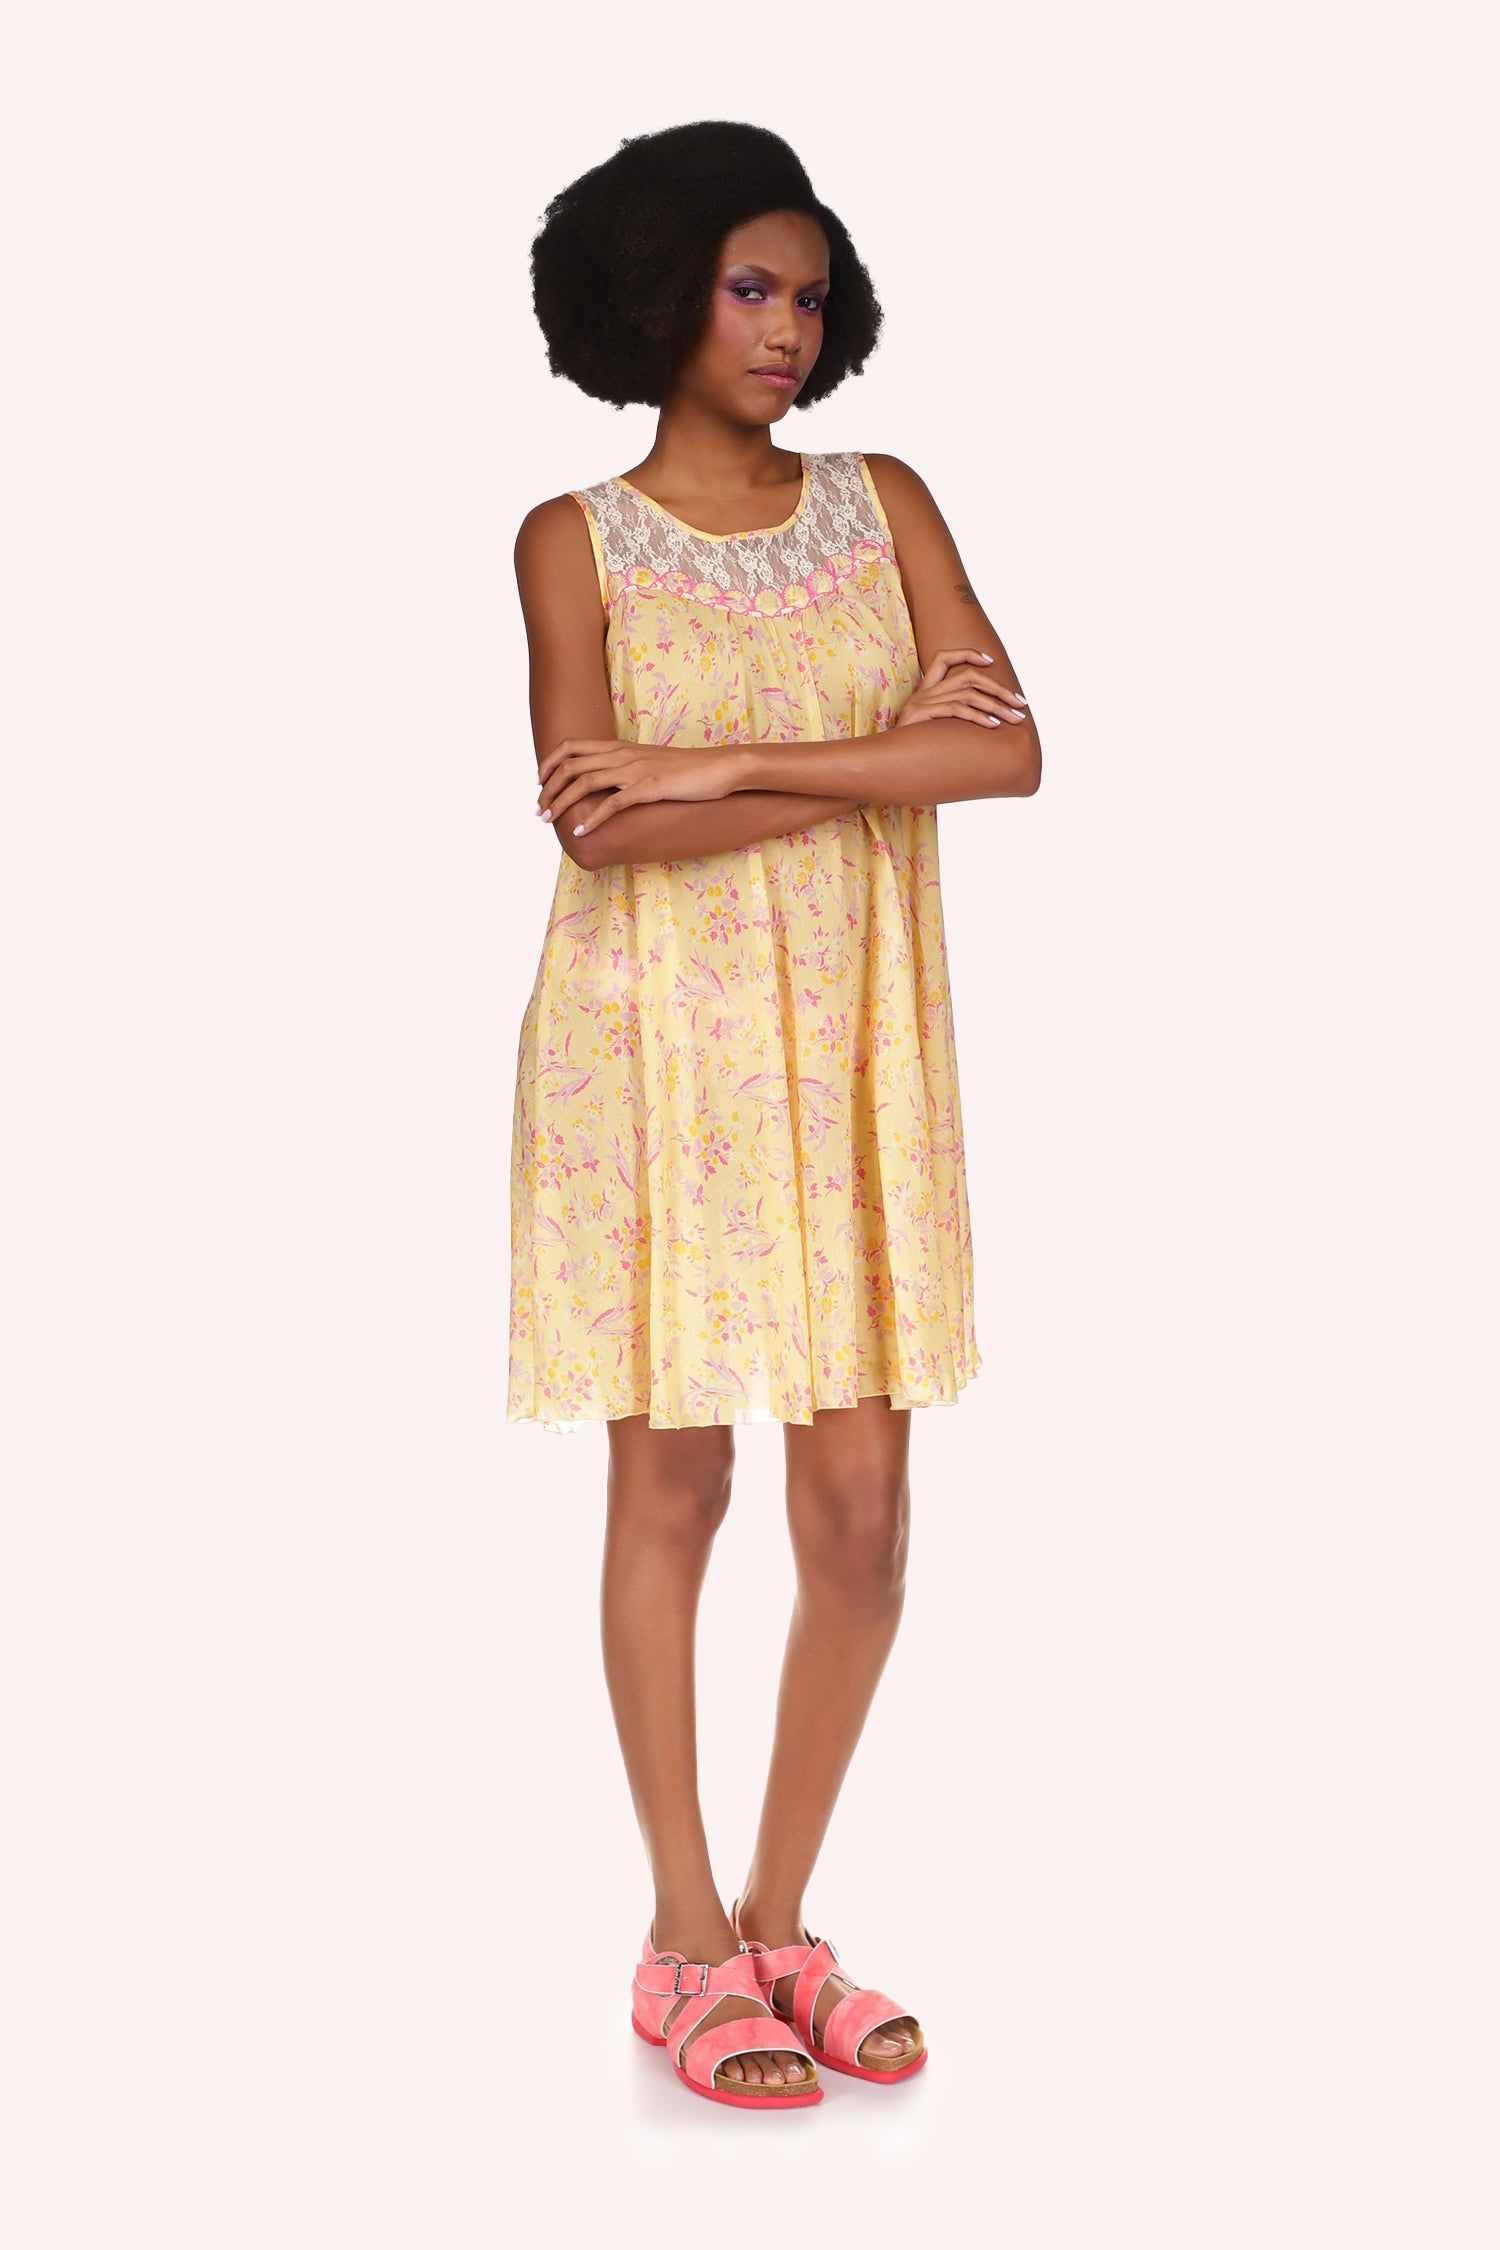 Arcadia Blossom Sleeveless Dress, yellow with small red spots, knee long, large ruffle effects